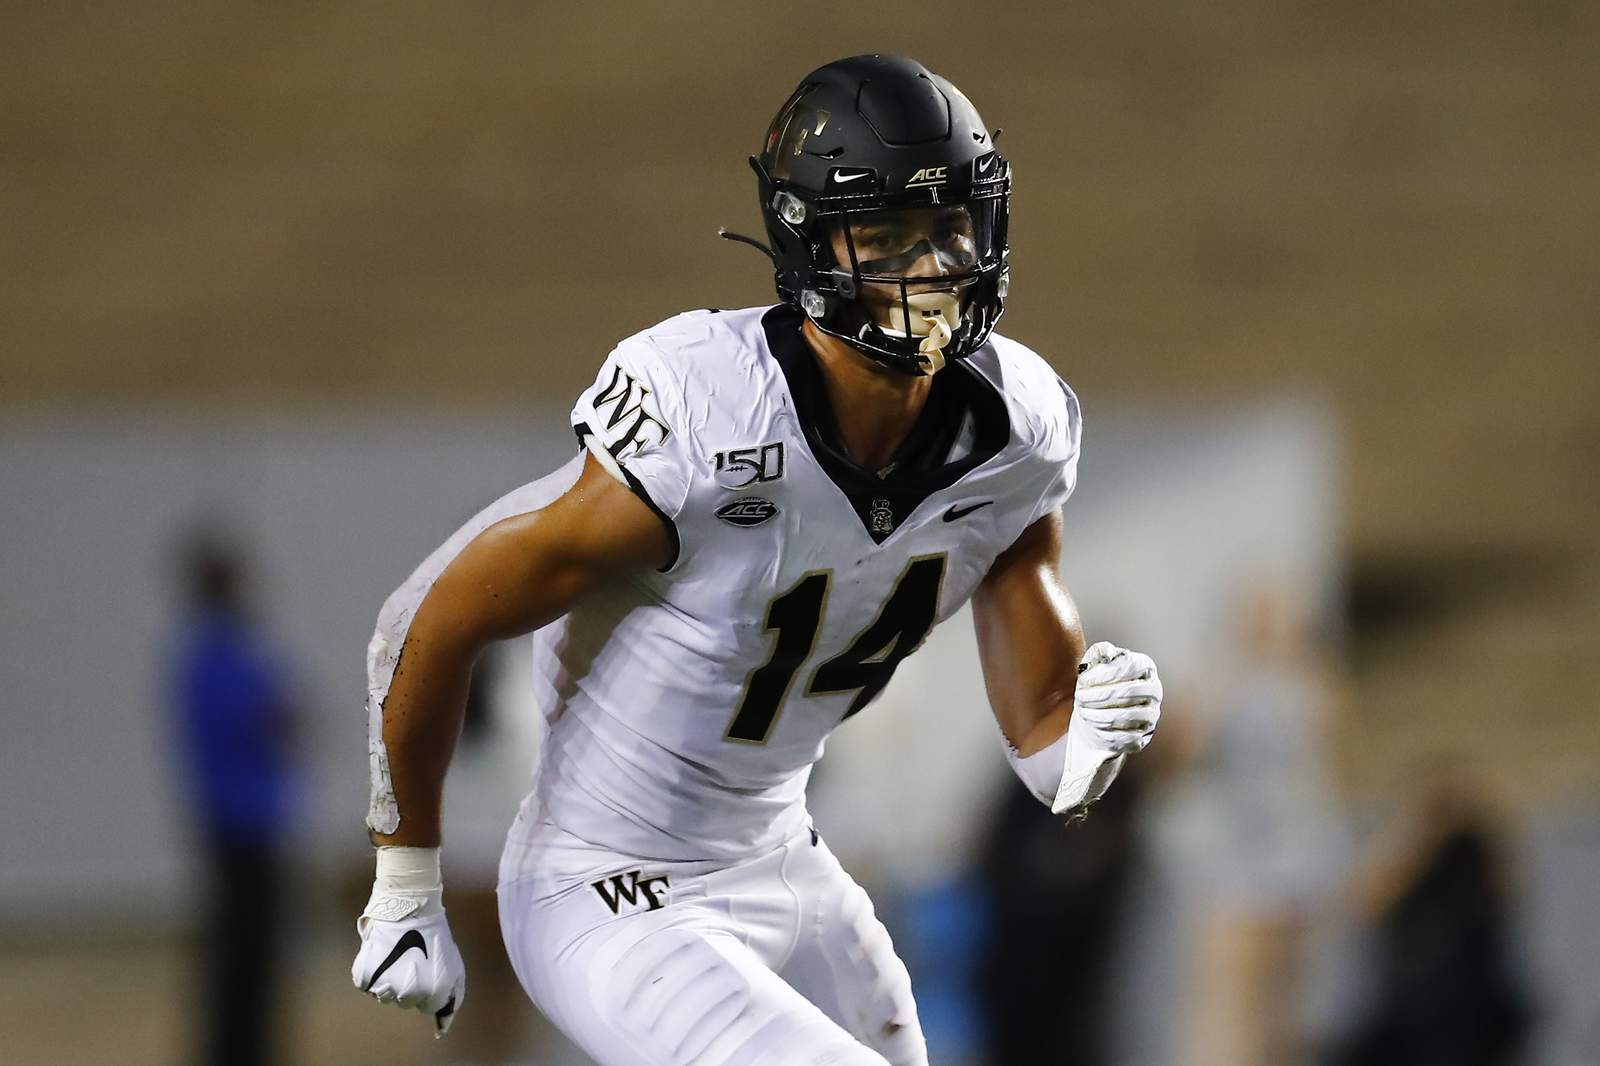 The Latest: Wake Forest star receiver opts out of season